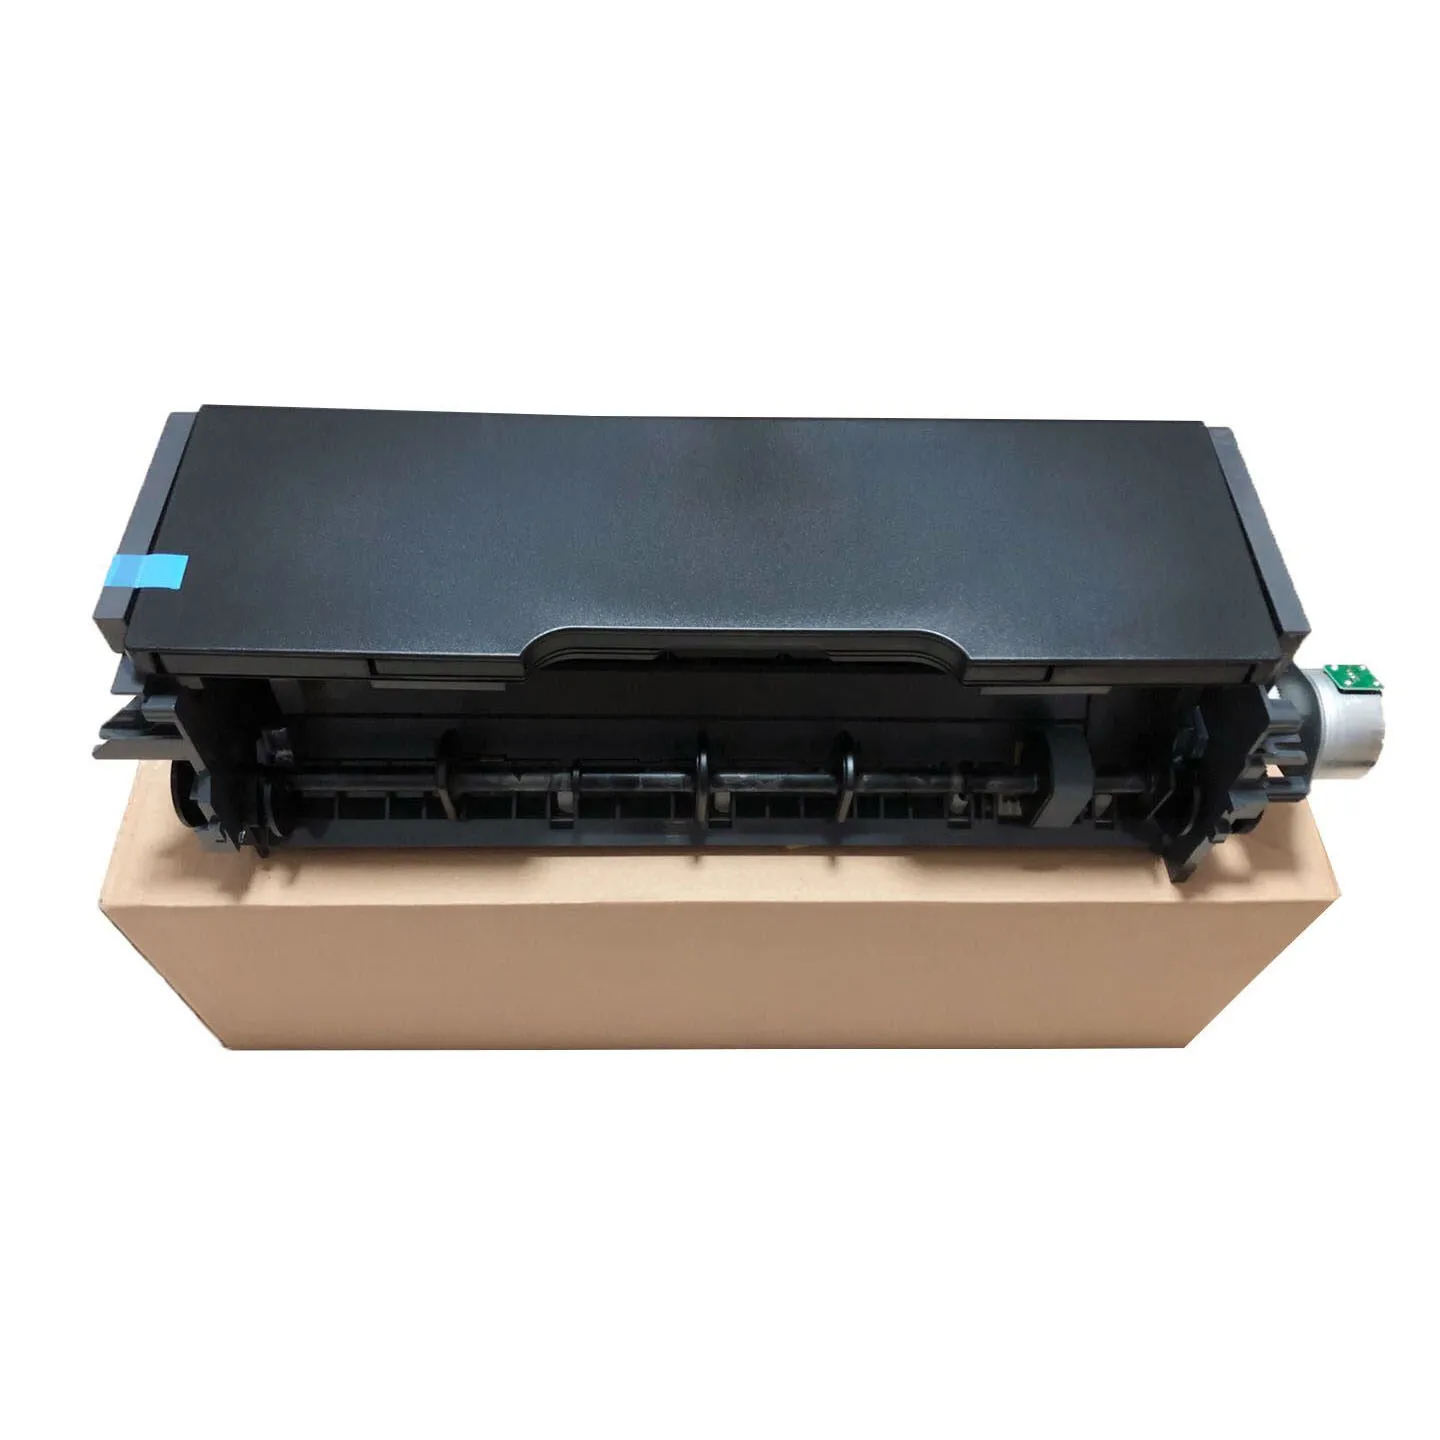 Original Paper Feed Assembly for Epson 1390 1100 L1300 1400 1430 1800 R2000 4004 1500 Paper Feeders Pickup Roller